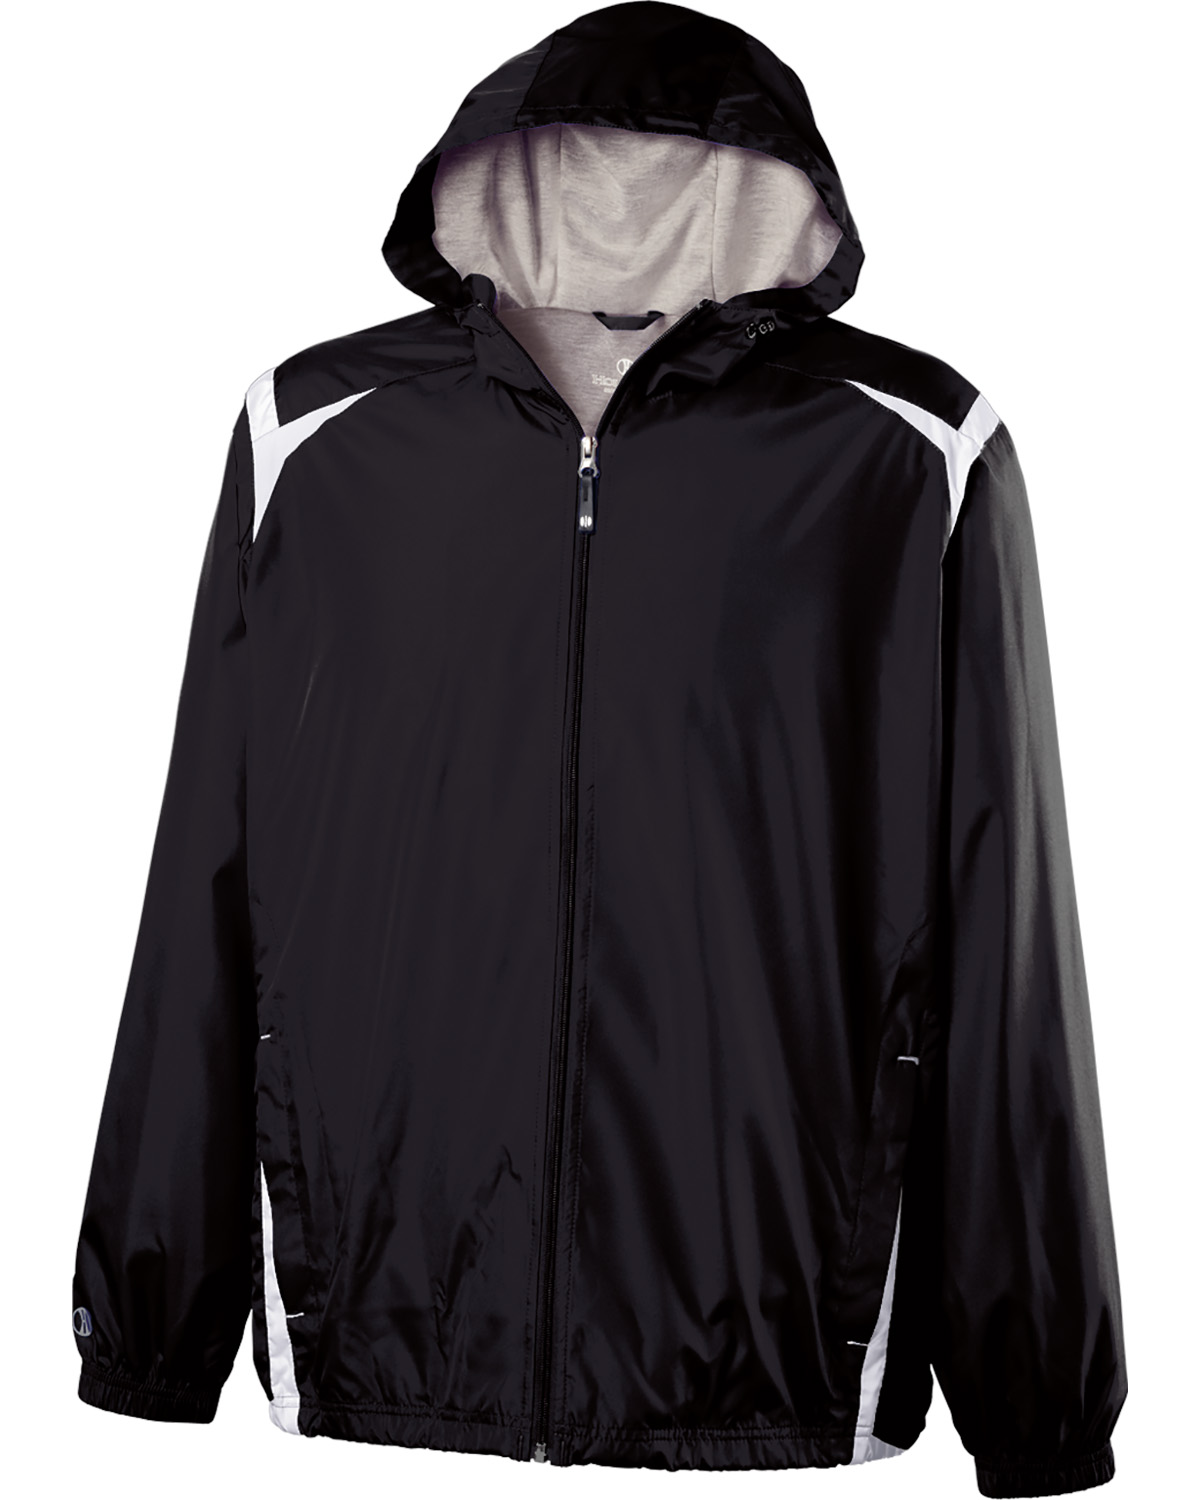 Holloway 229076 - Adult Polyester Full Zip Hooded Collision Jacket